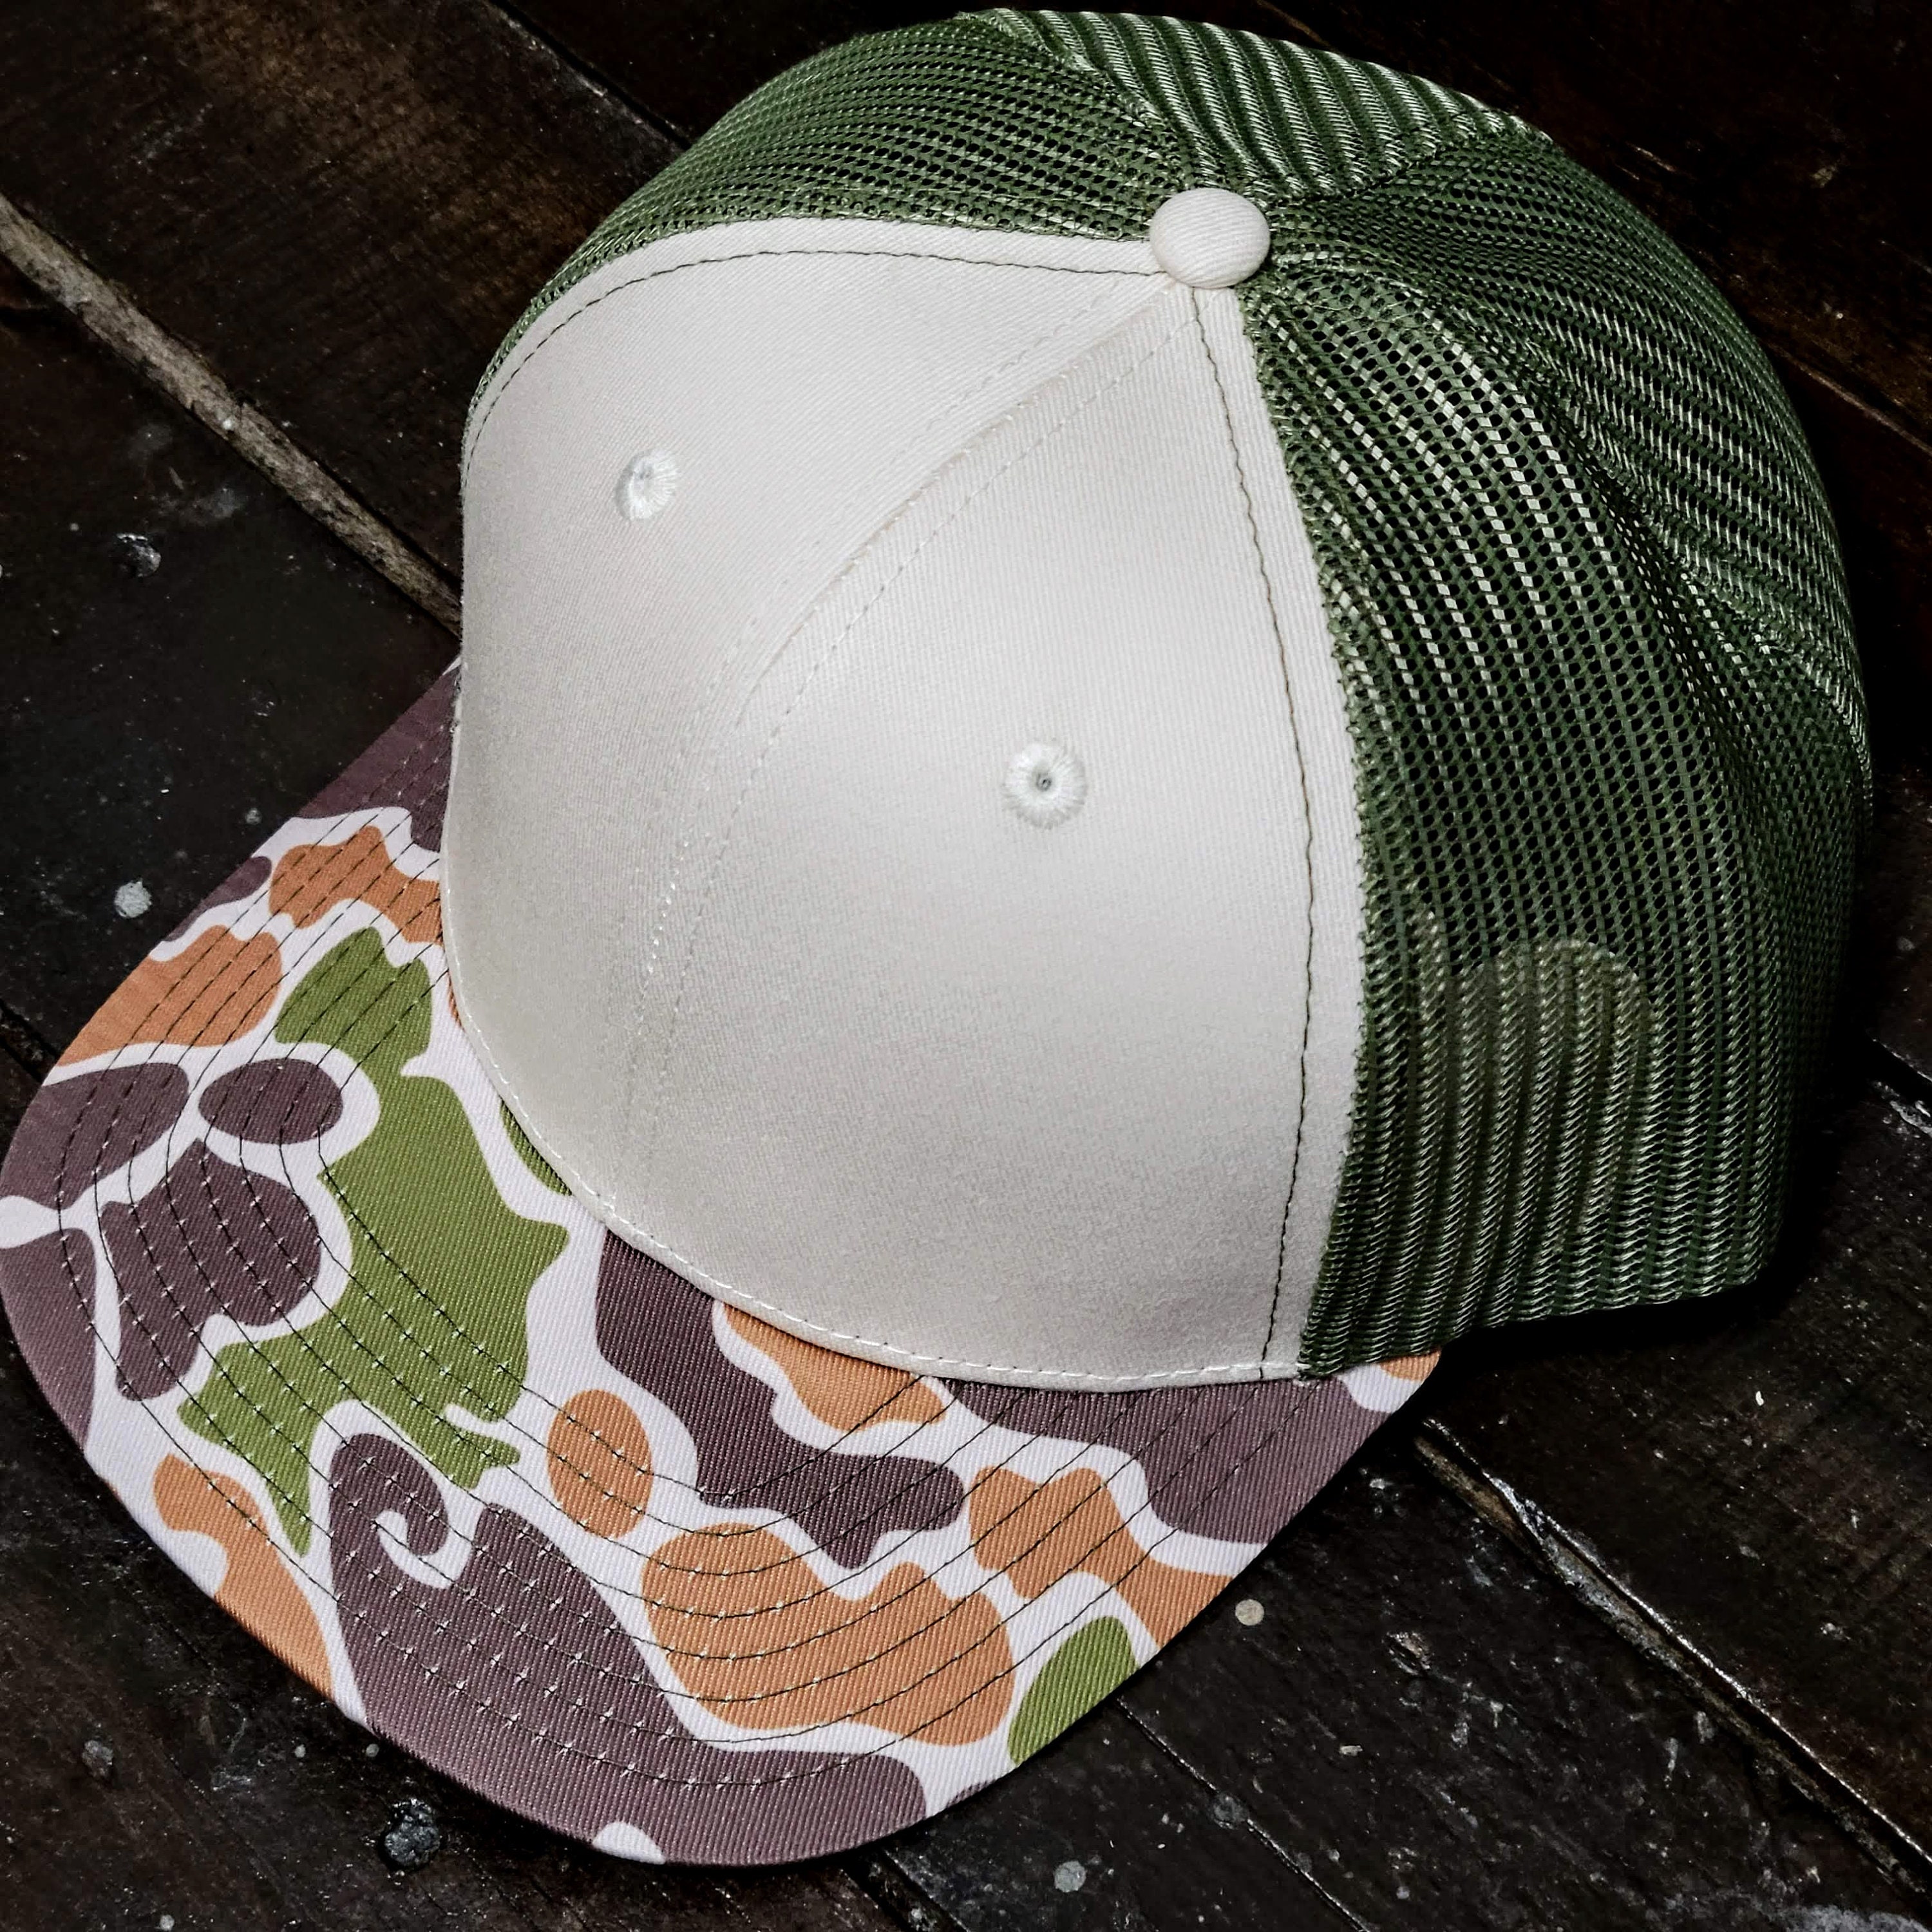 Leather Deer Patch on Classic Duck Camo Hat.